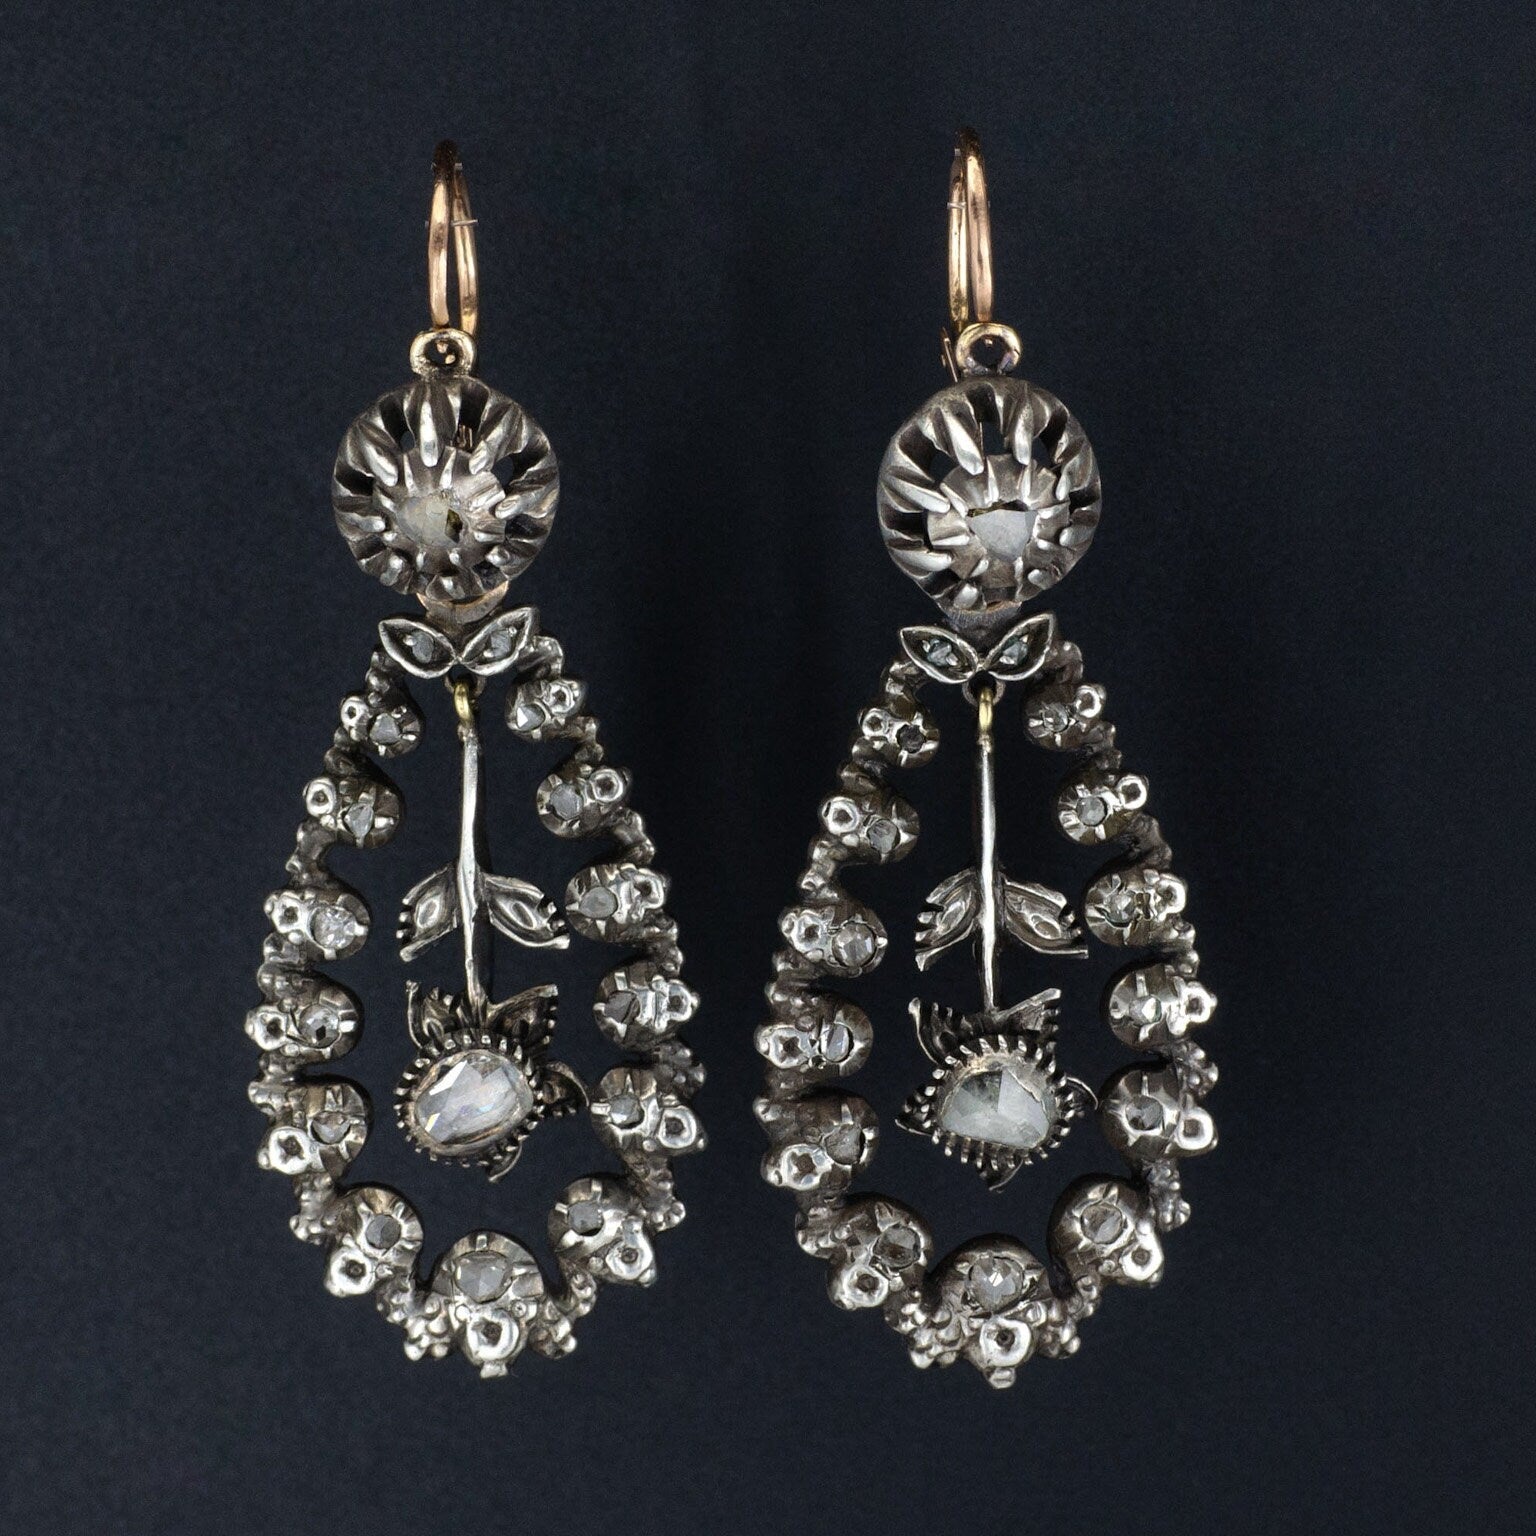 Antique Diamond Earrings of Silver with 14k Rose Gold